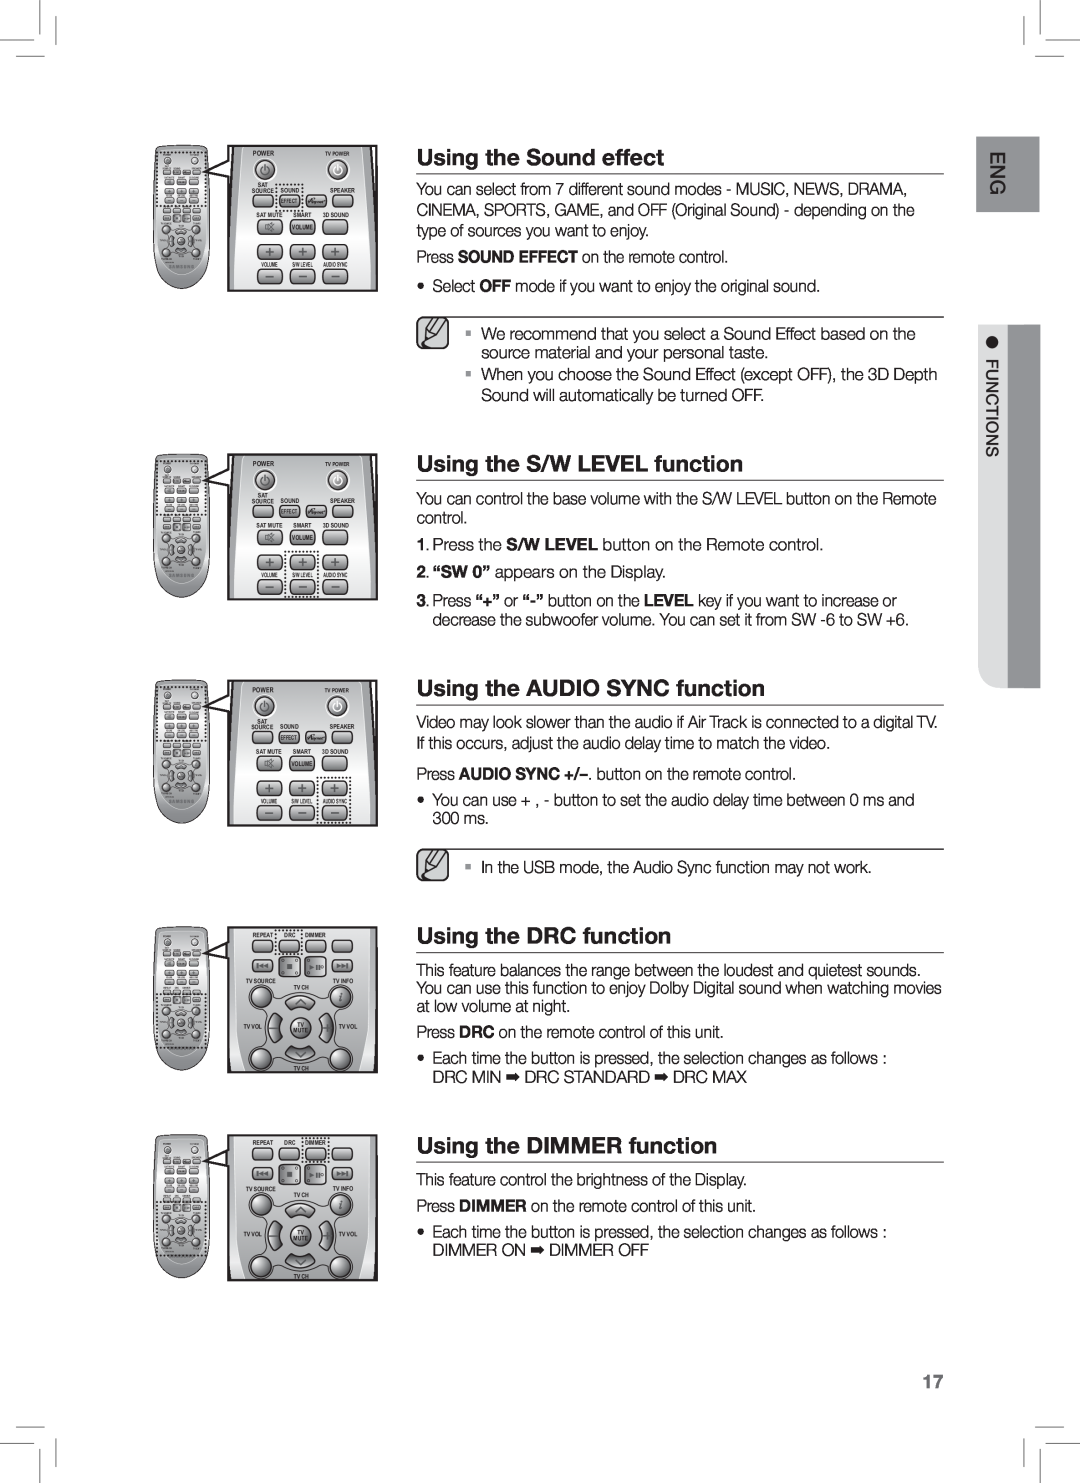 Samsung HW-E350 user manual Using the Sound effect, Using the S/W LEVEL function, Using the AUDIO SYNC function 